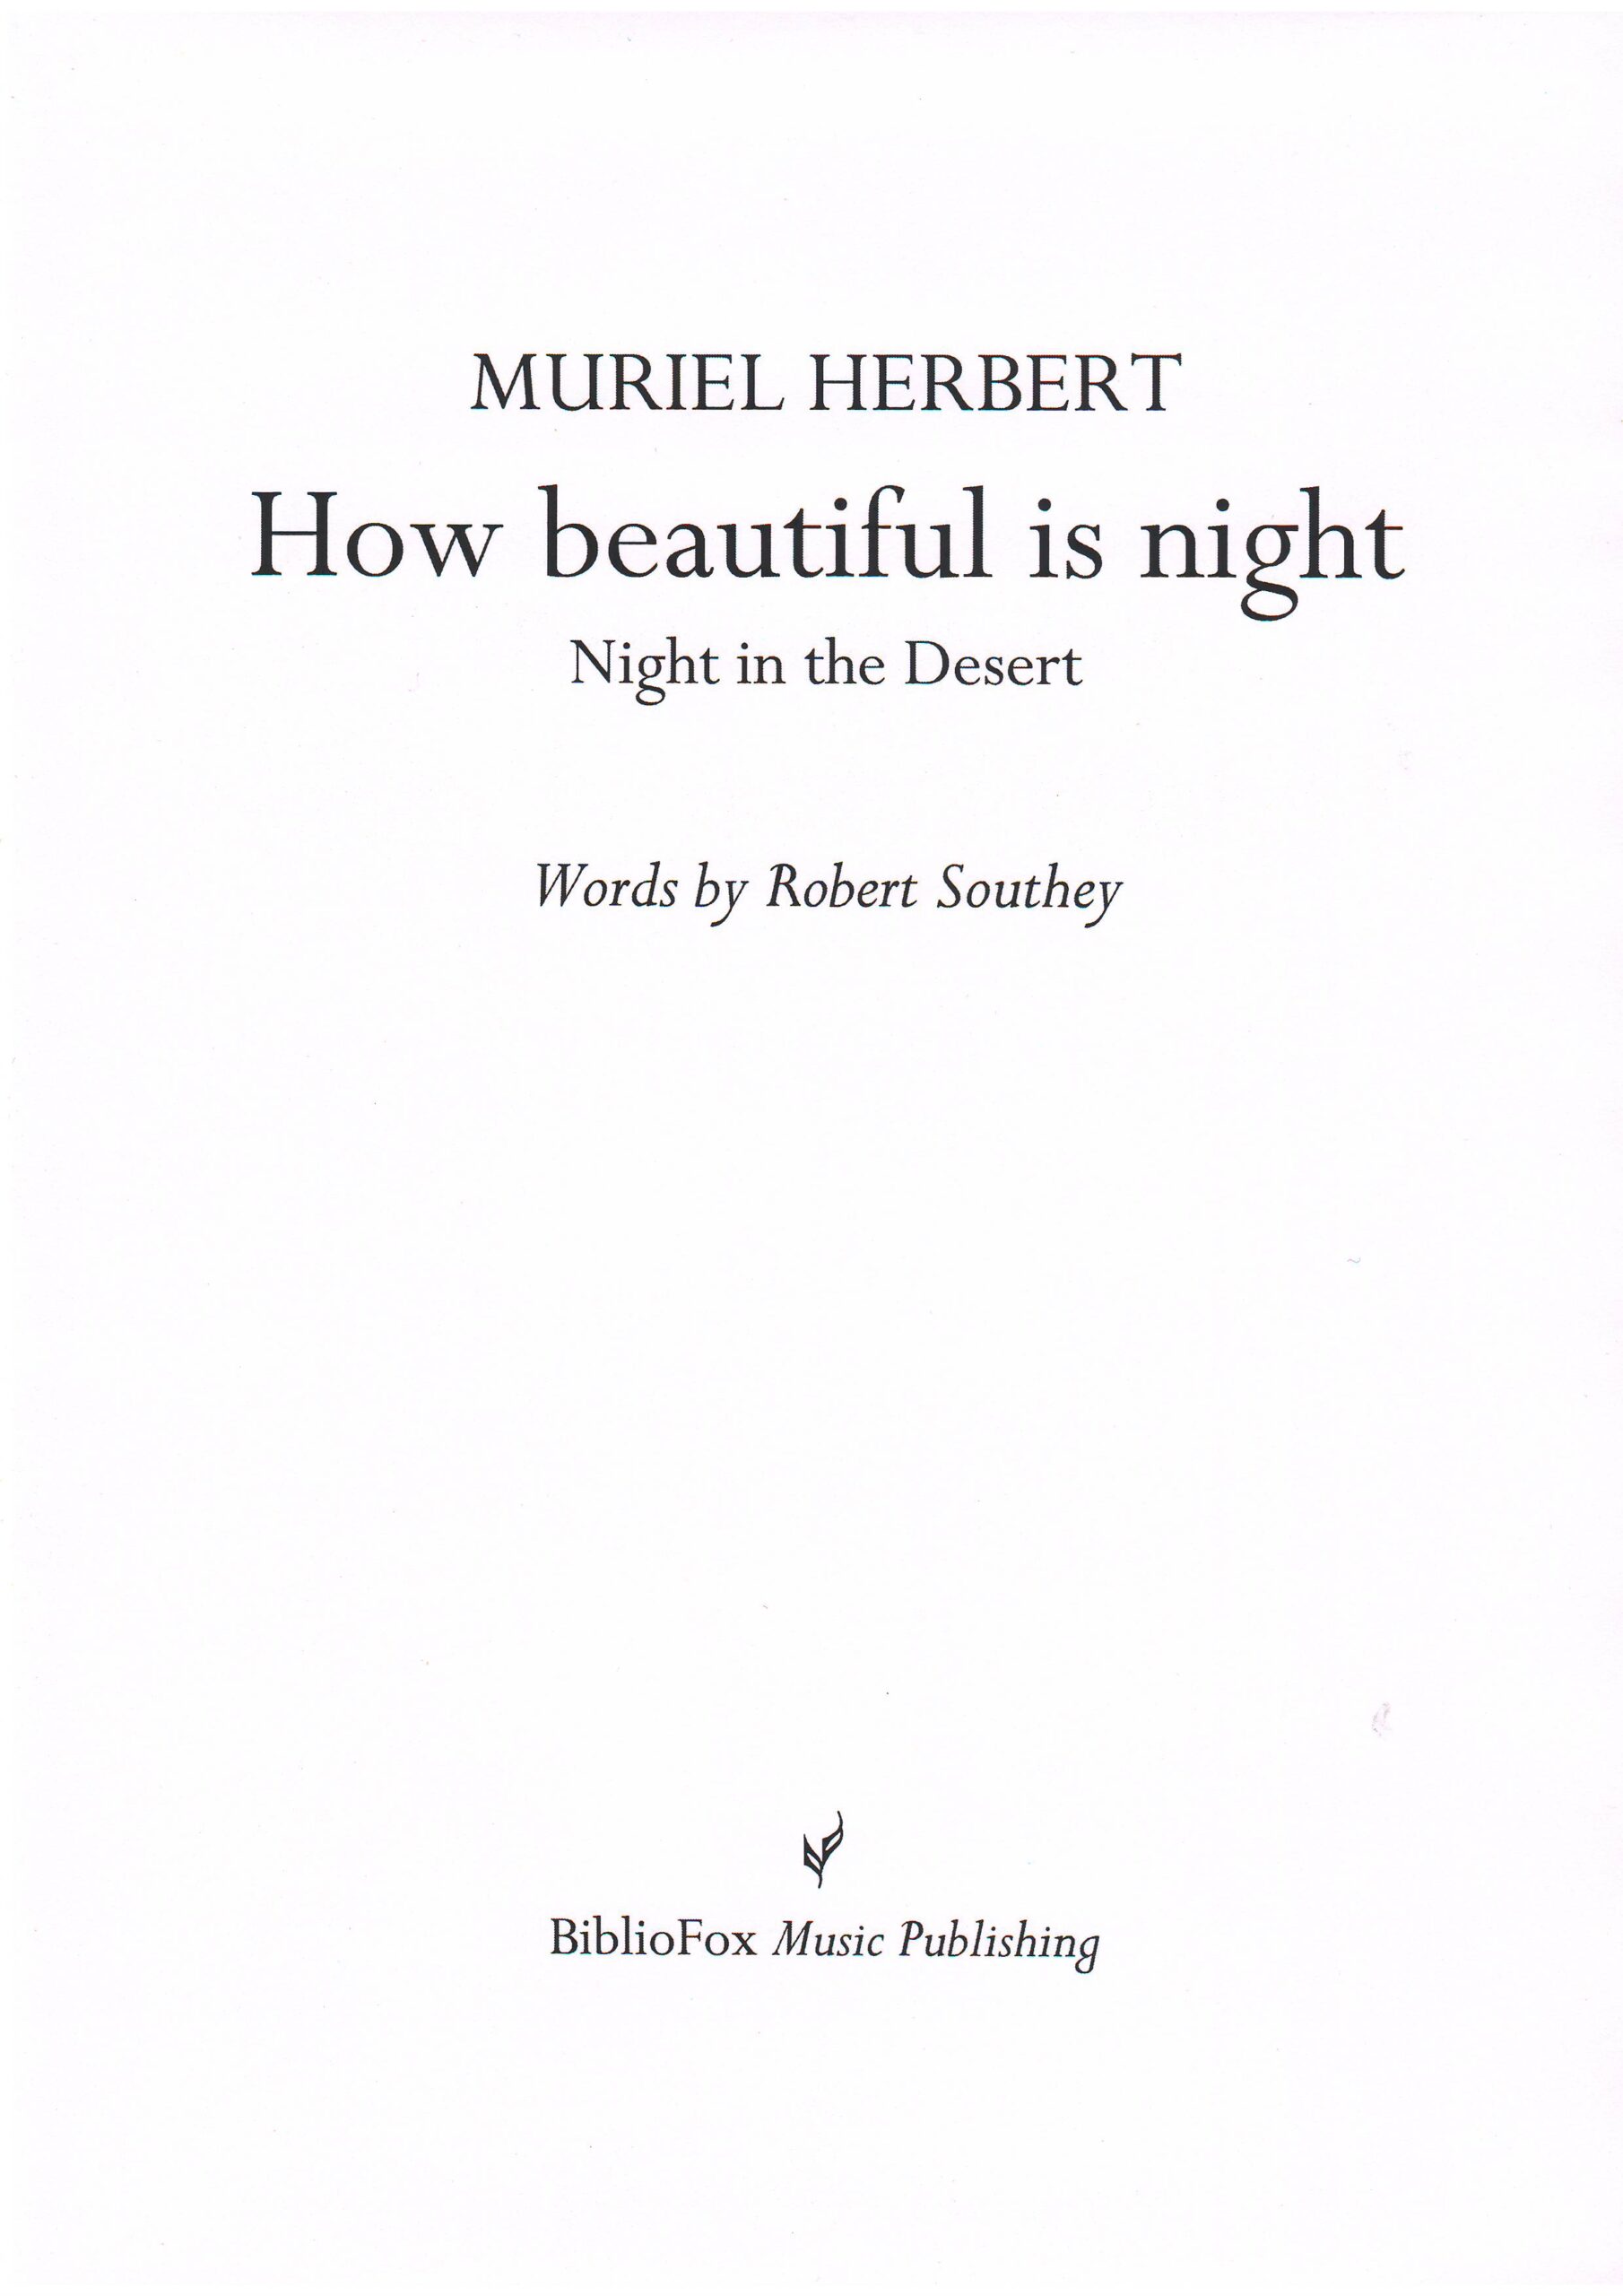 Cover page of Herbert How Beautiful is Night